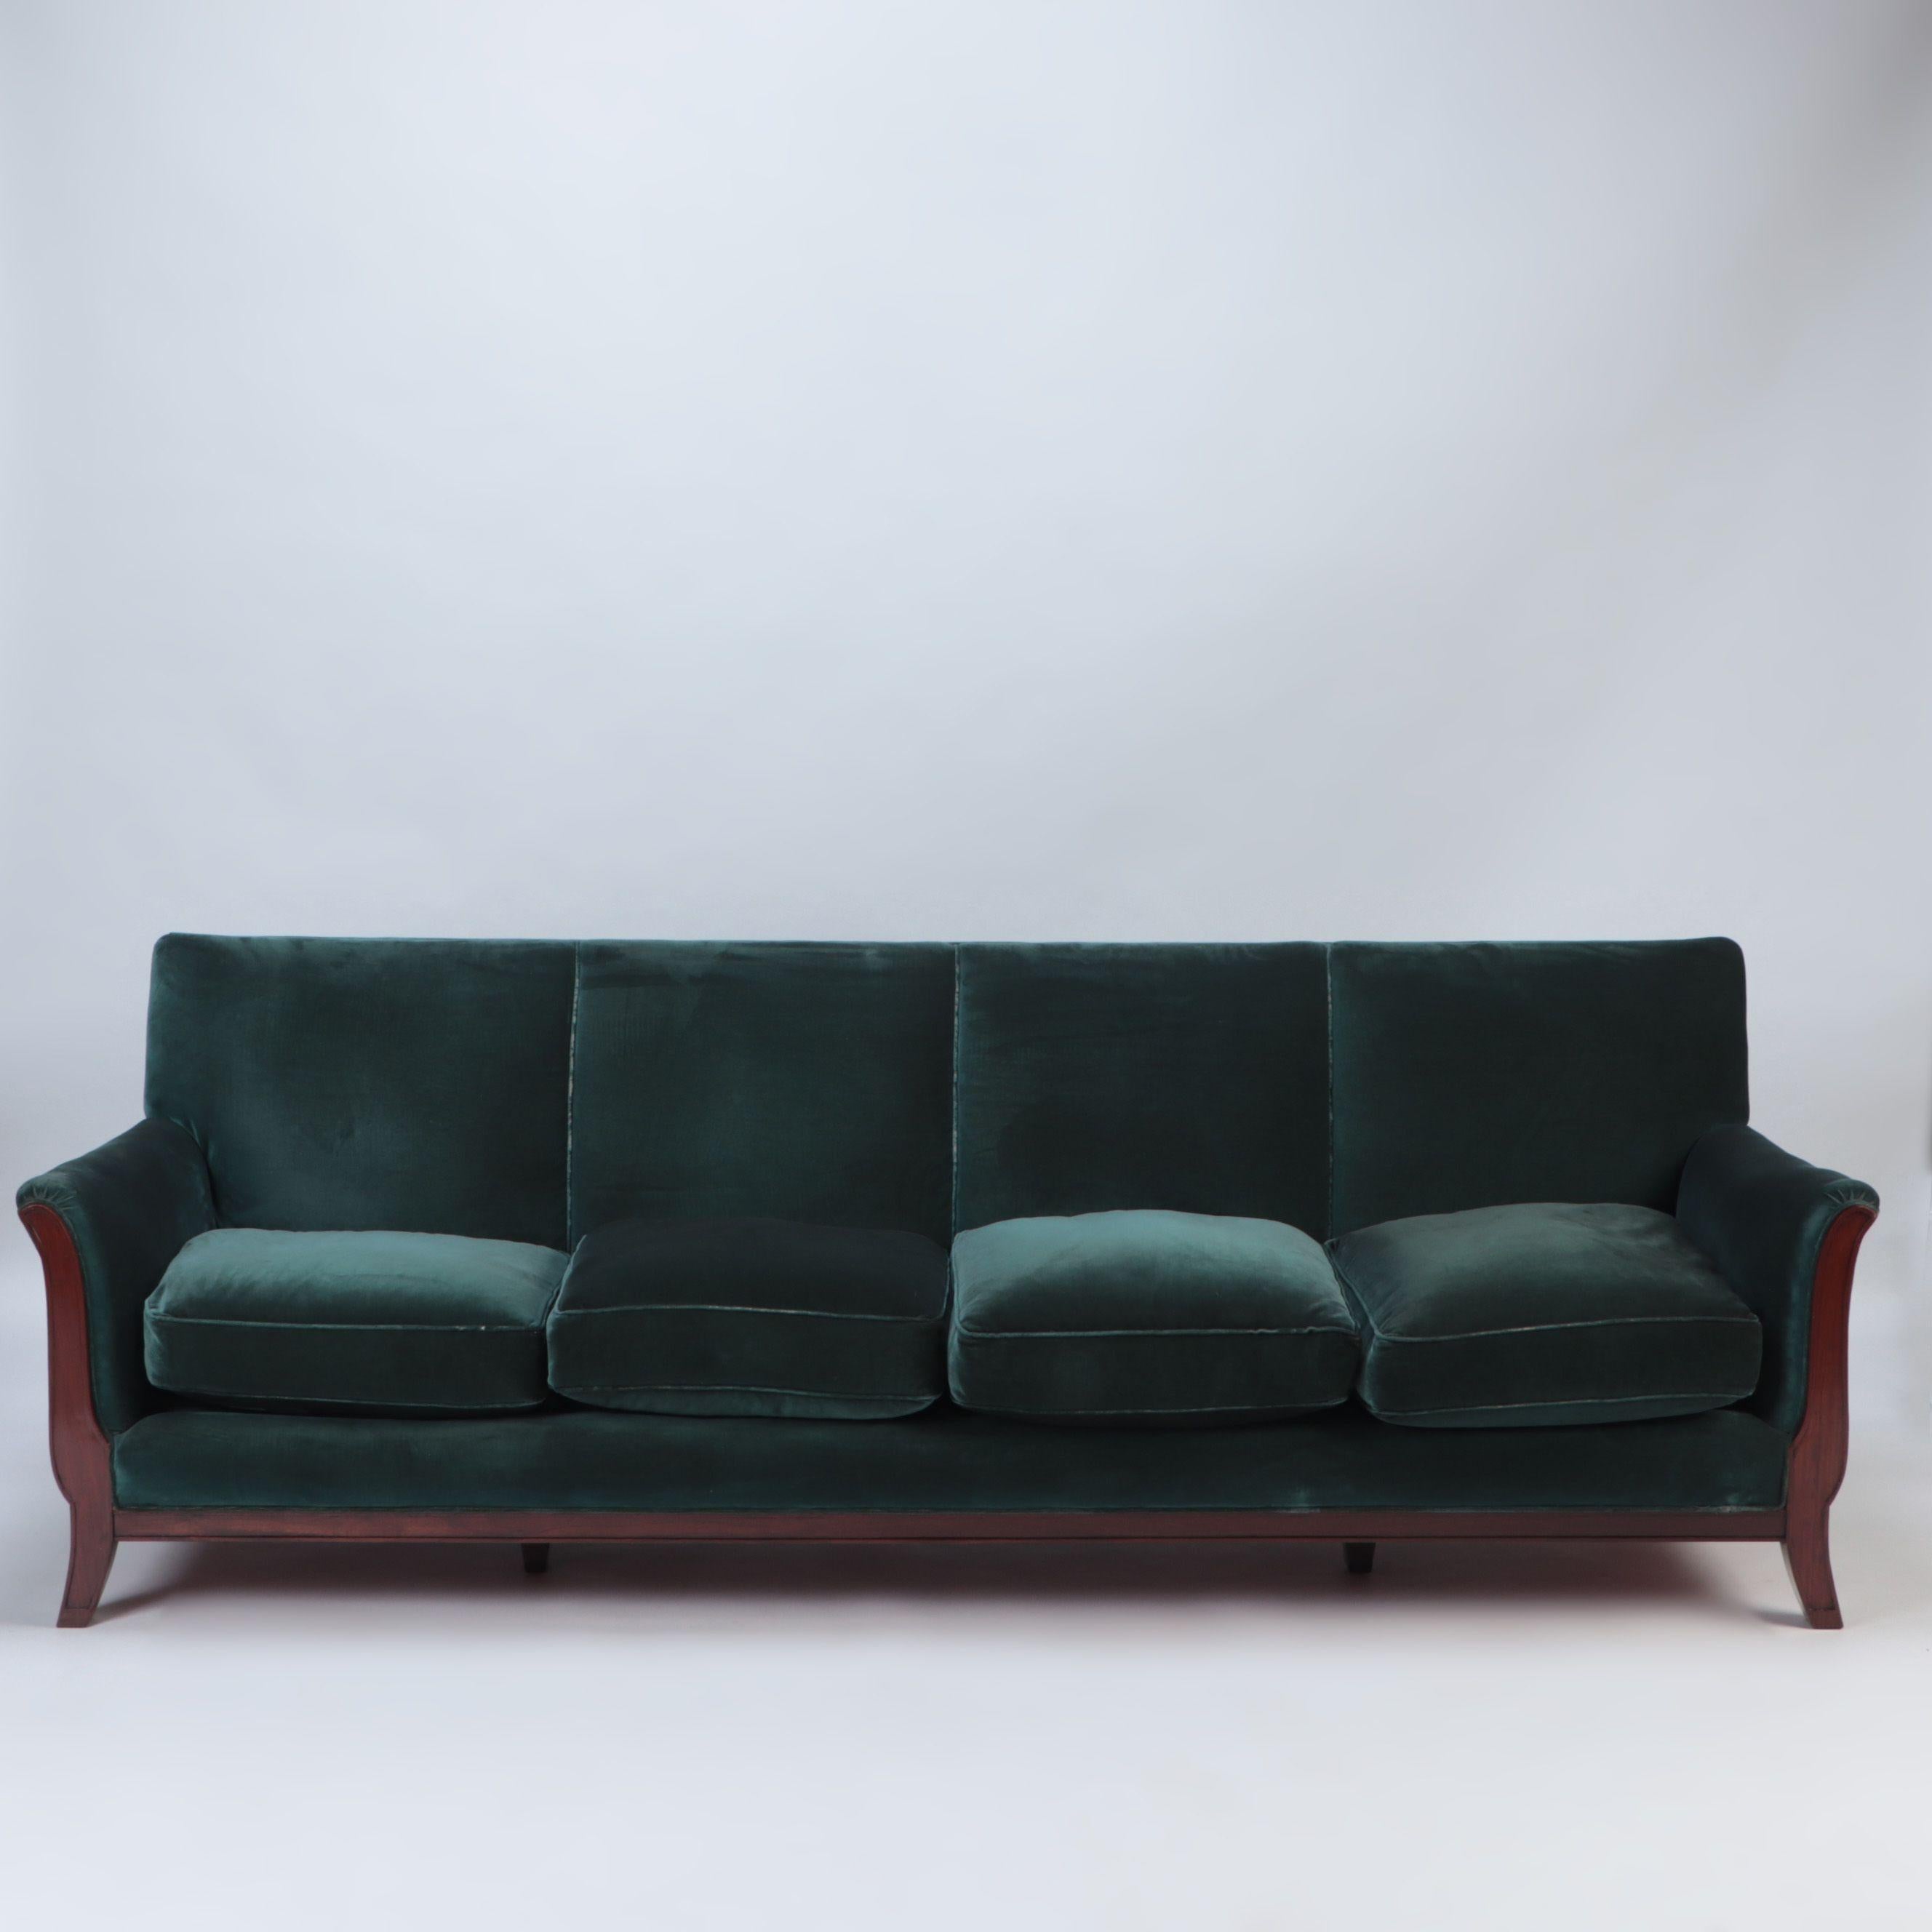 A French large sofa with green velvet upholstery on angled square tapering legs, circa 1945.